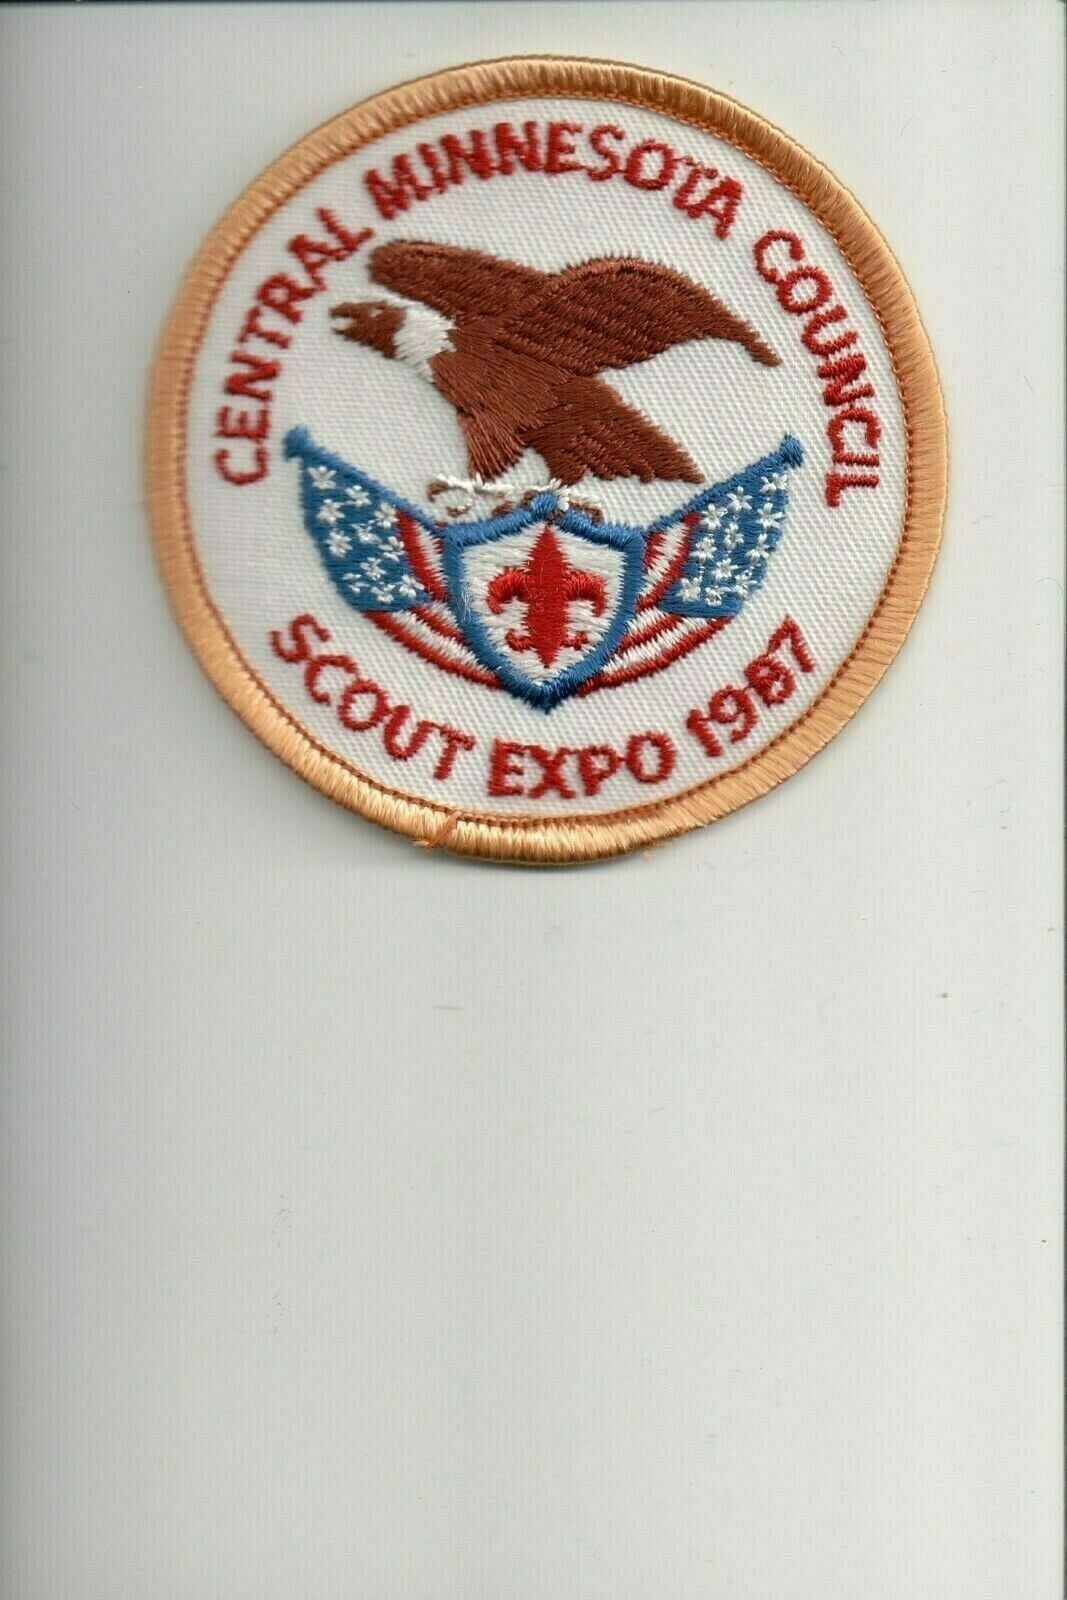 1987 Central Minnesota Council Scout Expo Patch